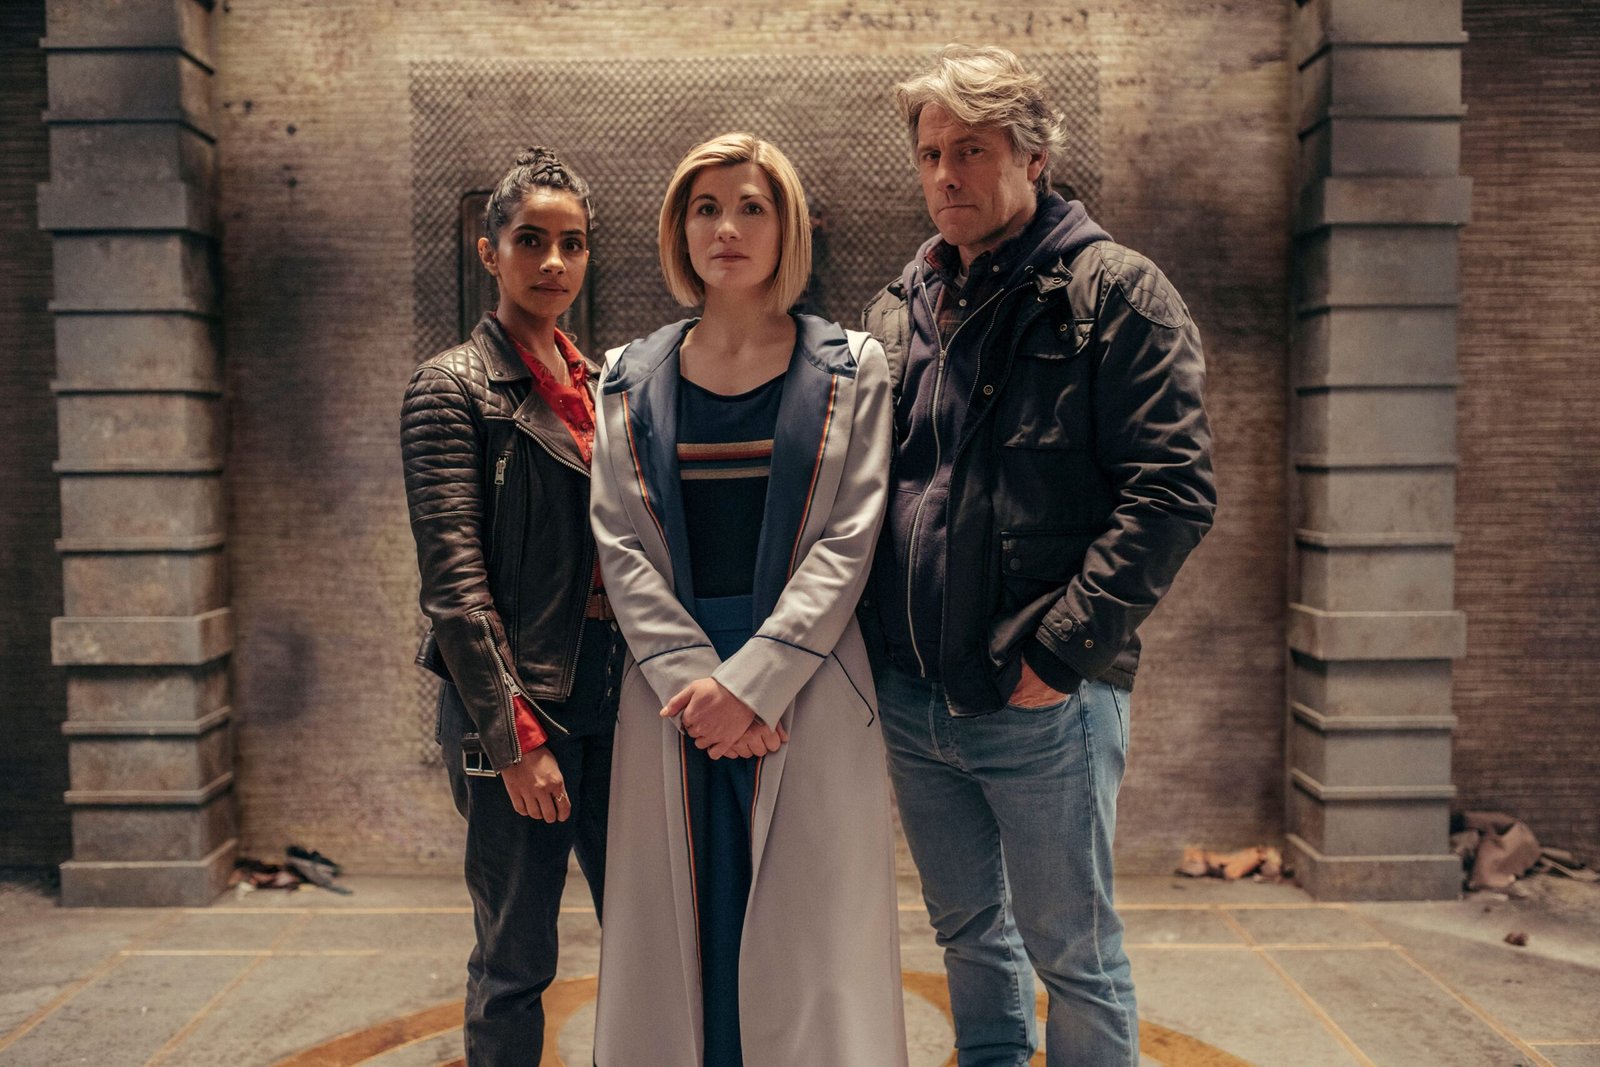 Check Out the New Teaser Trailer for Doctor Who Series 13